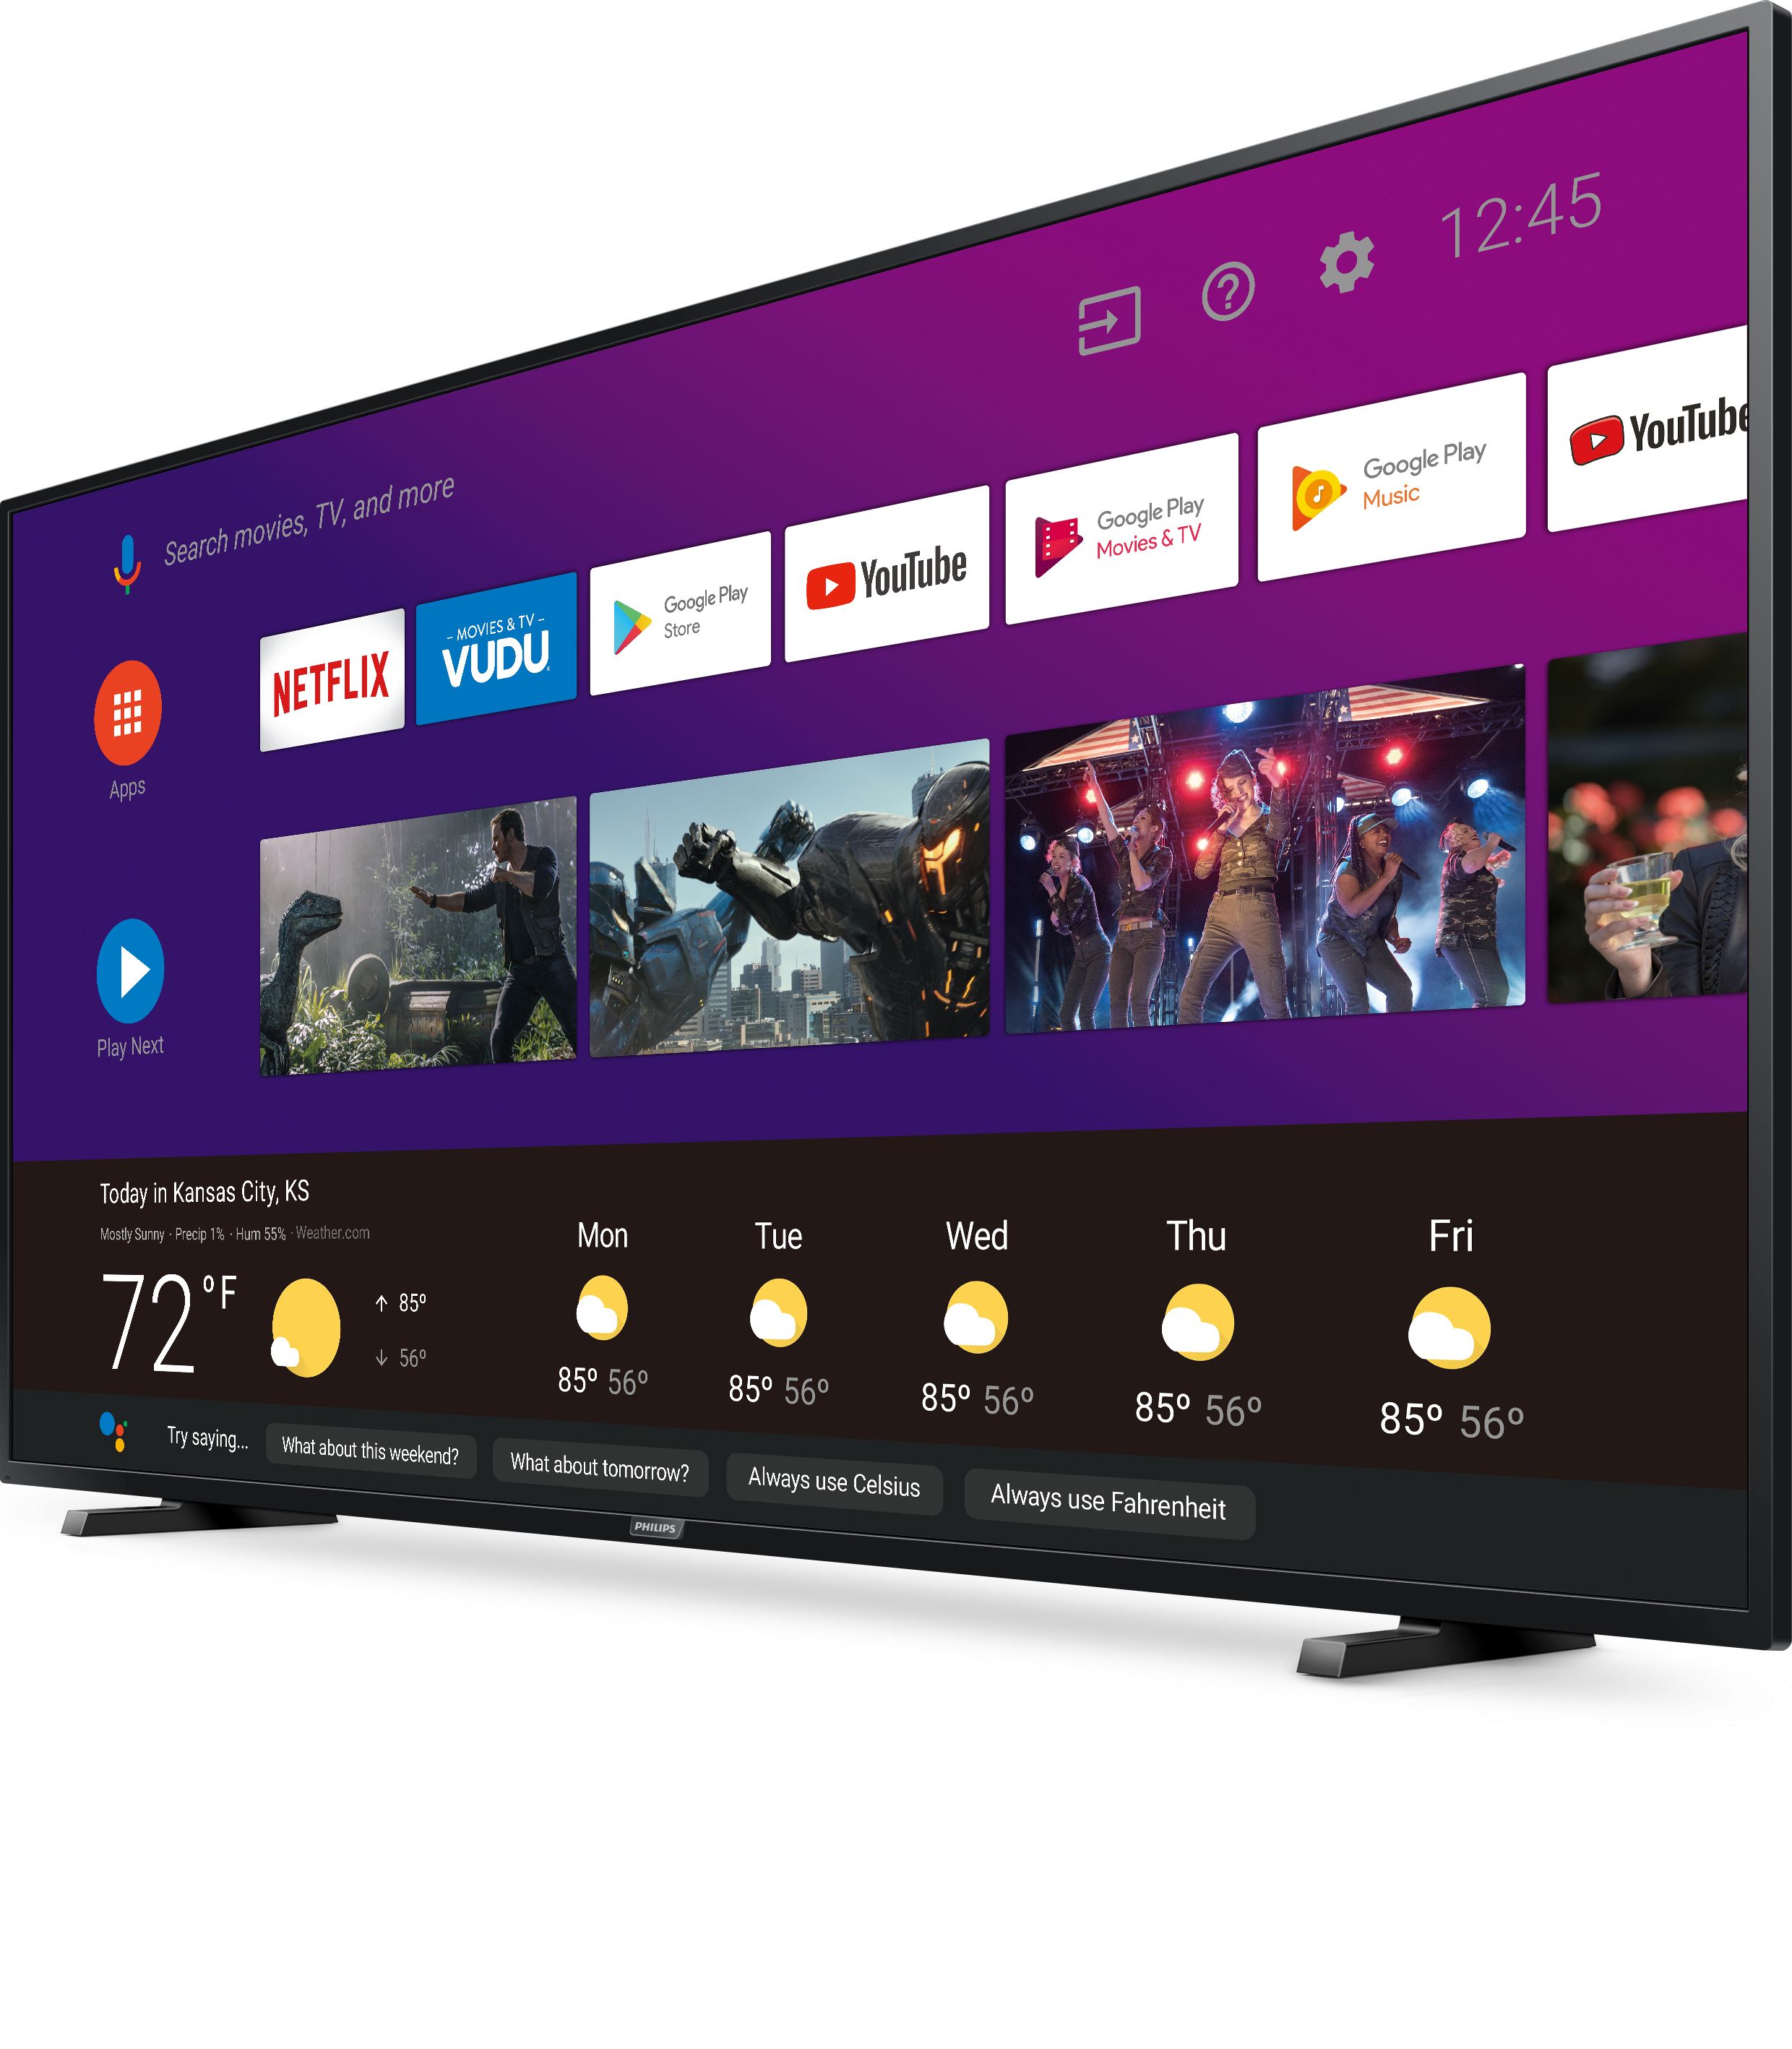 Philips 65" Class 4K Ultra HD (2160p) Android Smart LED TV (65PFL5504/F7) - image 4 of 5